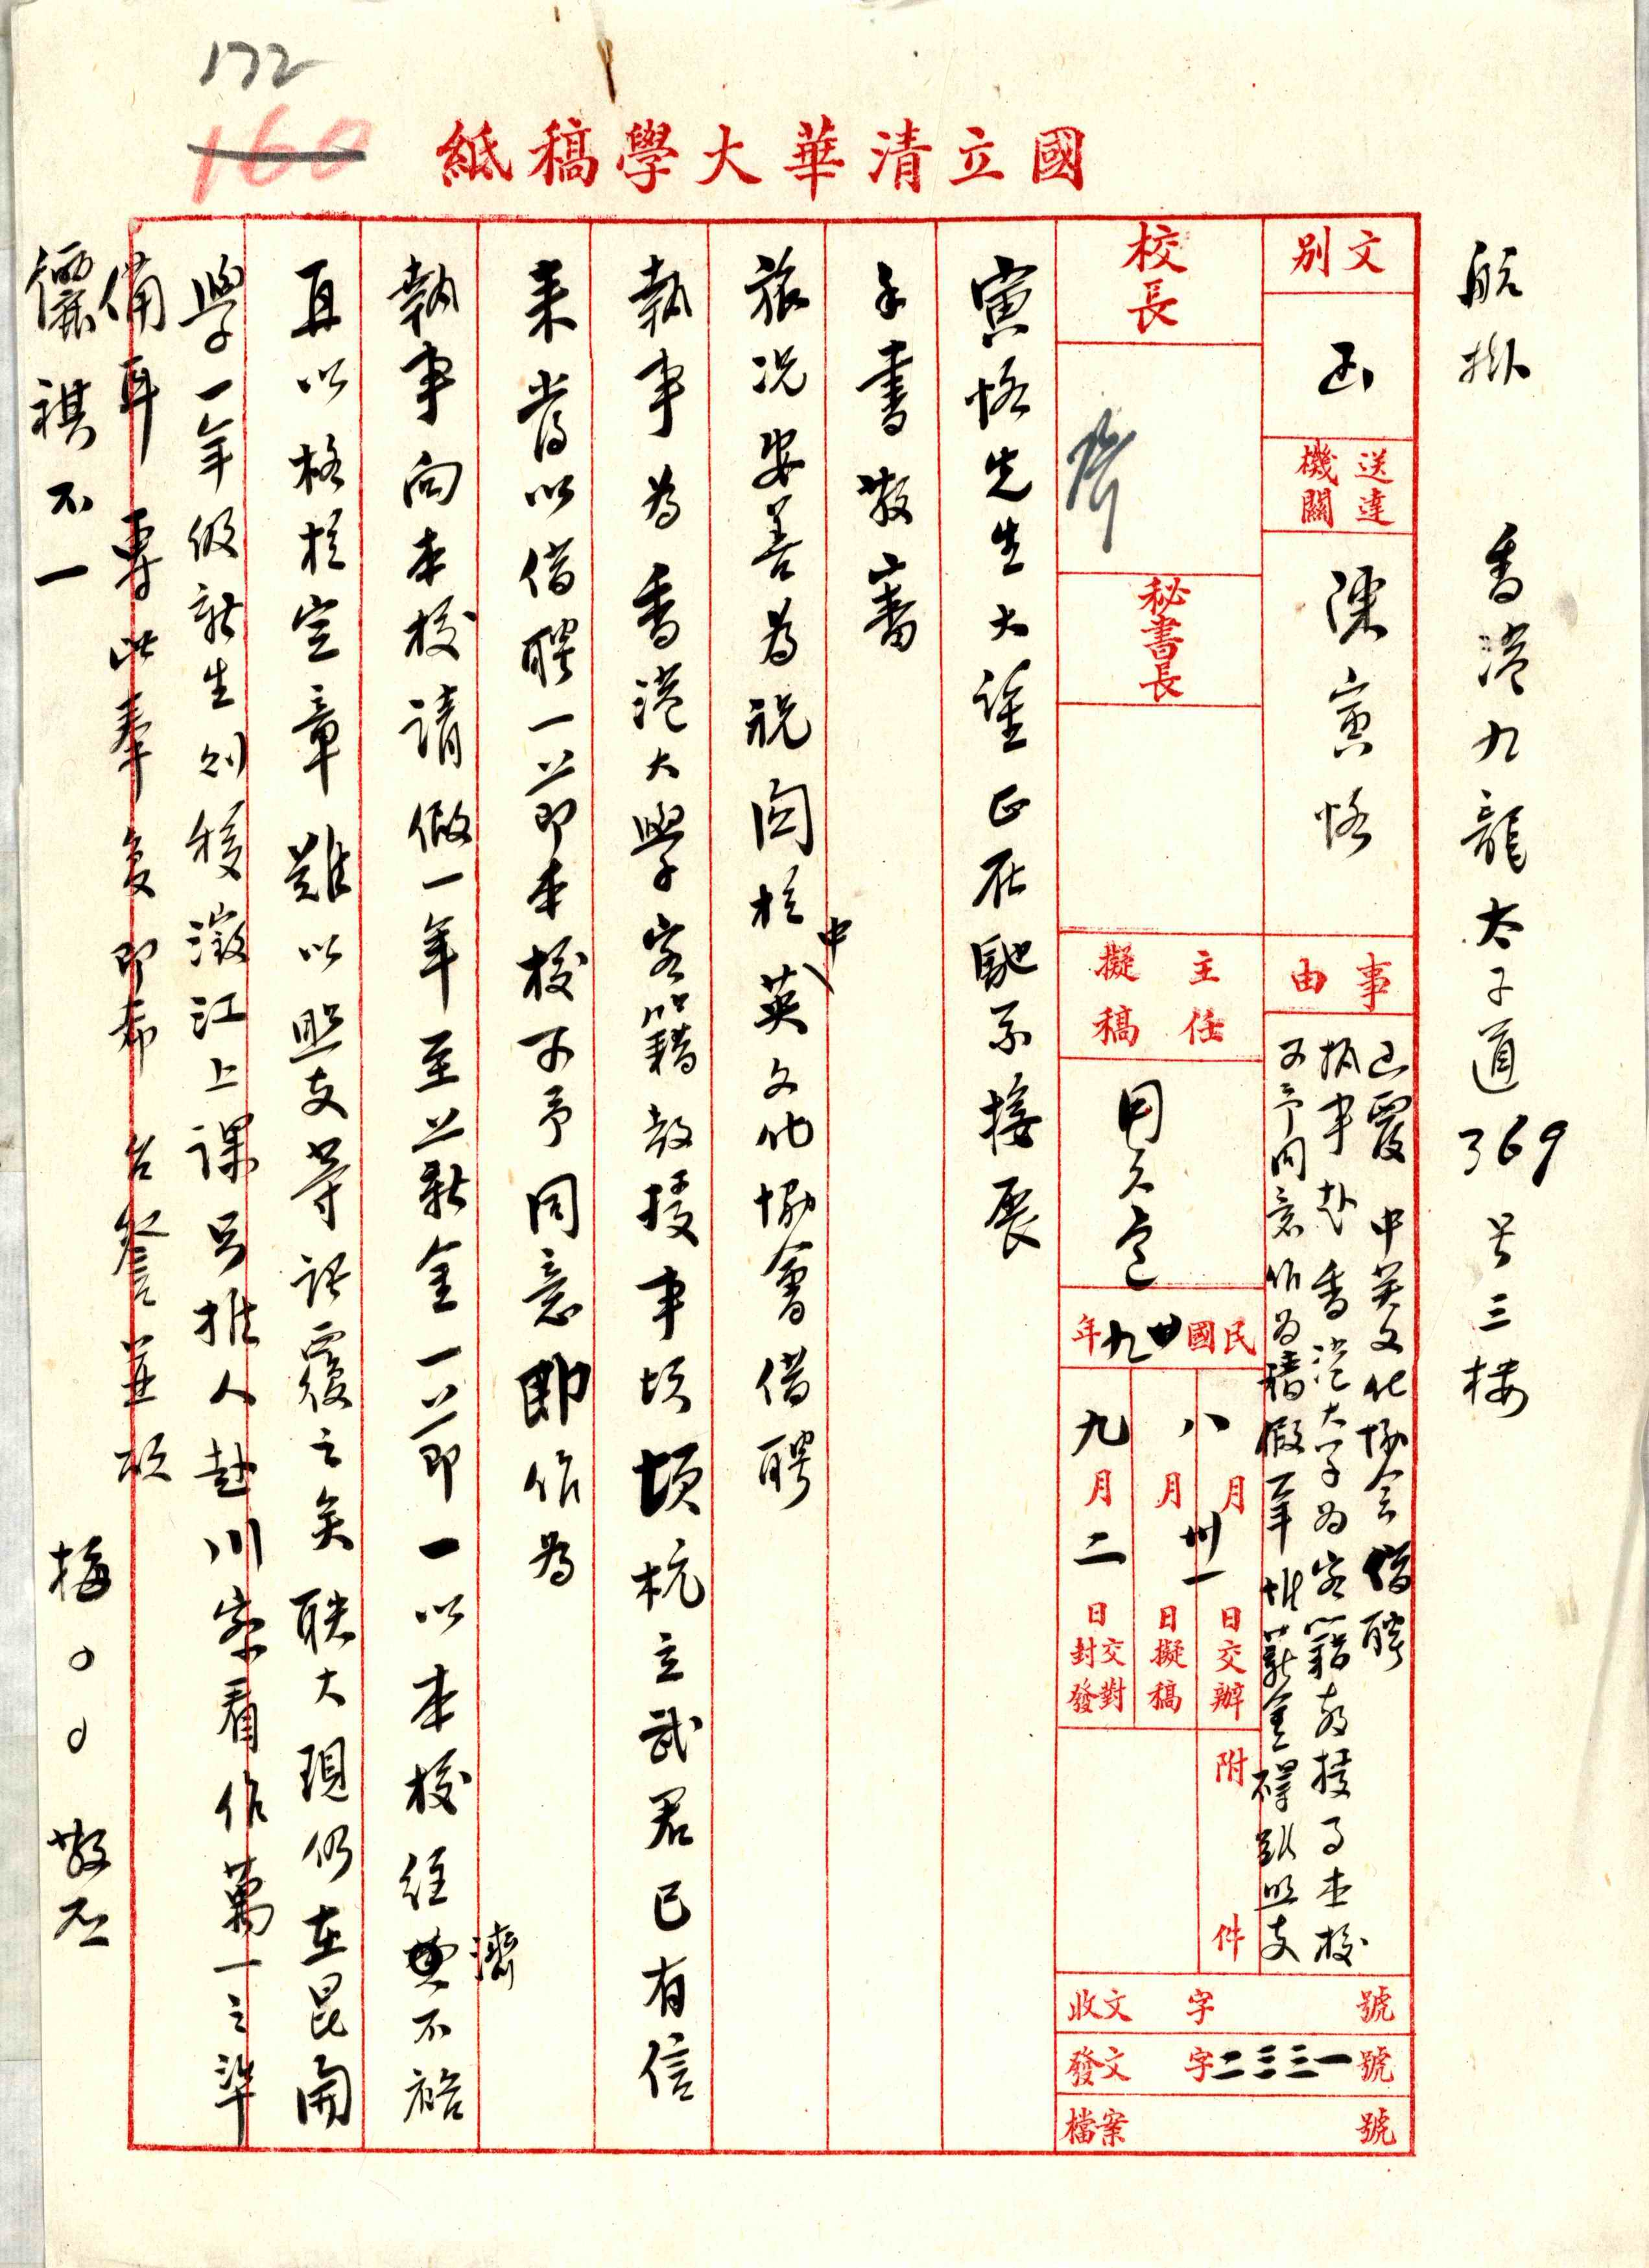 Record of consent letter for Chen Yinke teaching at the University of Hong Kong on sabbatical from National Tsing Hua University, 2 September 1940. Tsinghua University History Museum collection